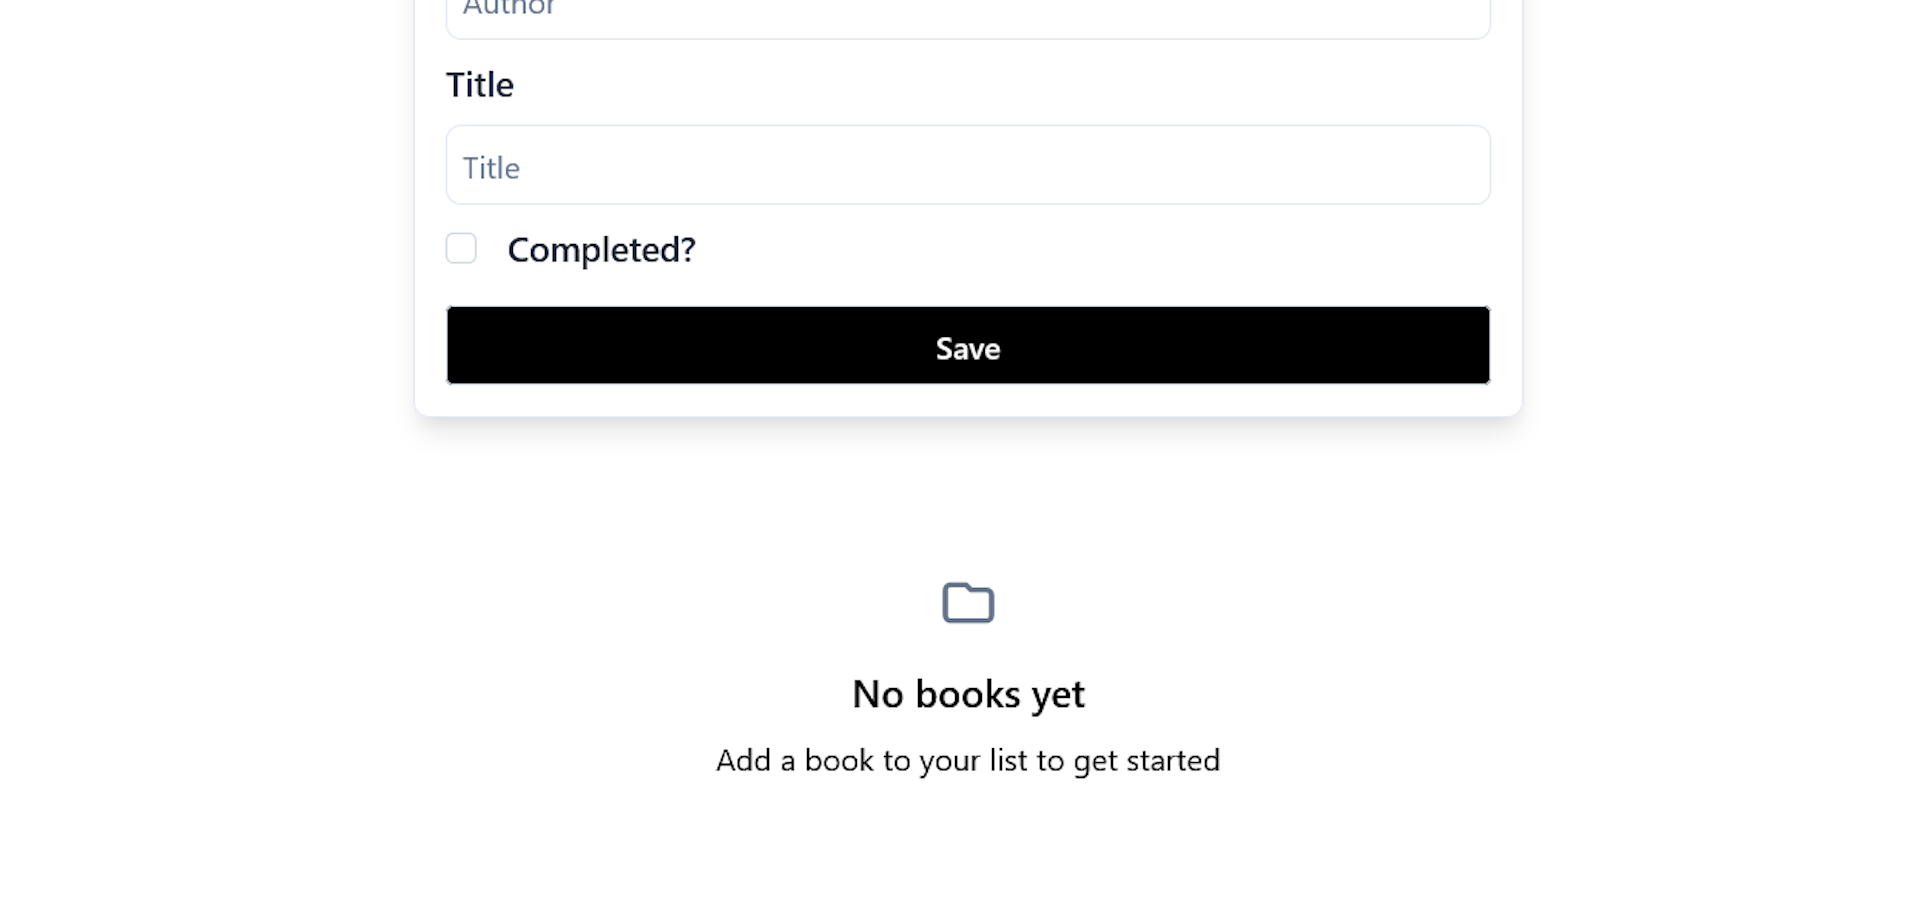 App interface when no books have been added